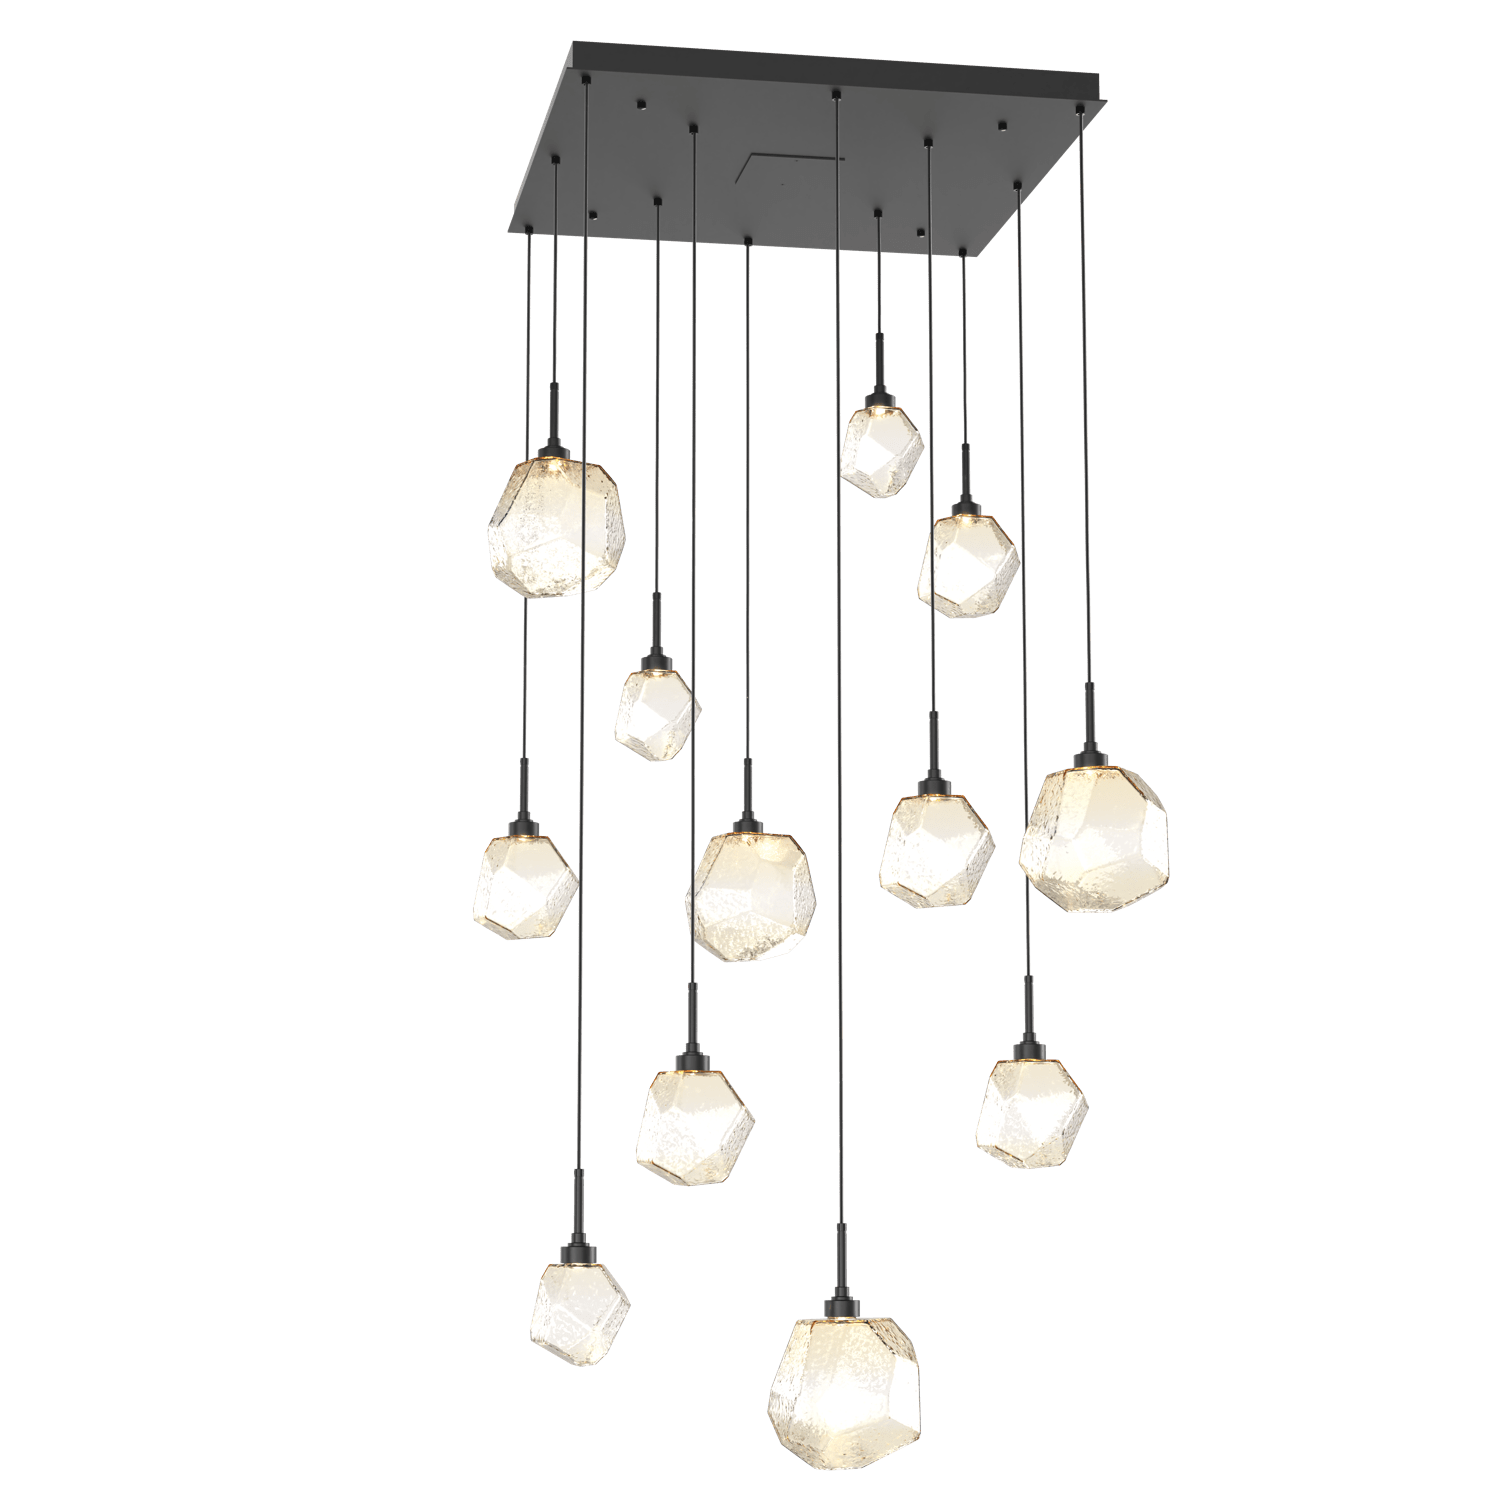 CHB0039-12-MB-A-Hammerton-Studio-Gem-12-light-square-pendant-chandelier-with-matte-black-finish-and-amber-blown-glass-shades-and-LED-lamping